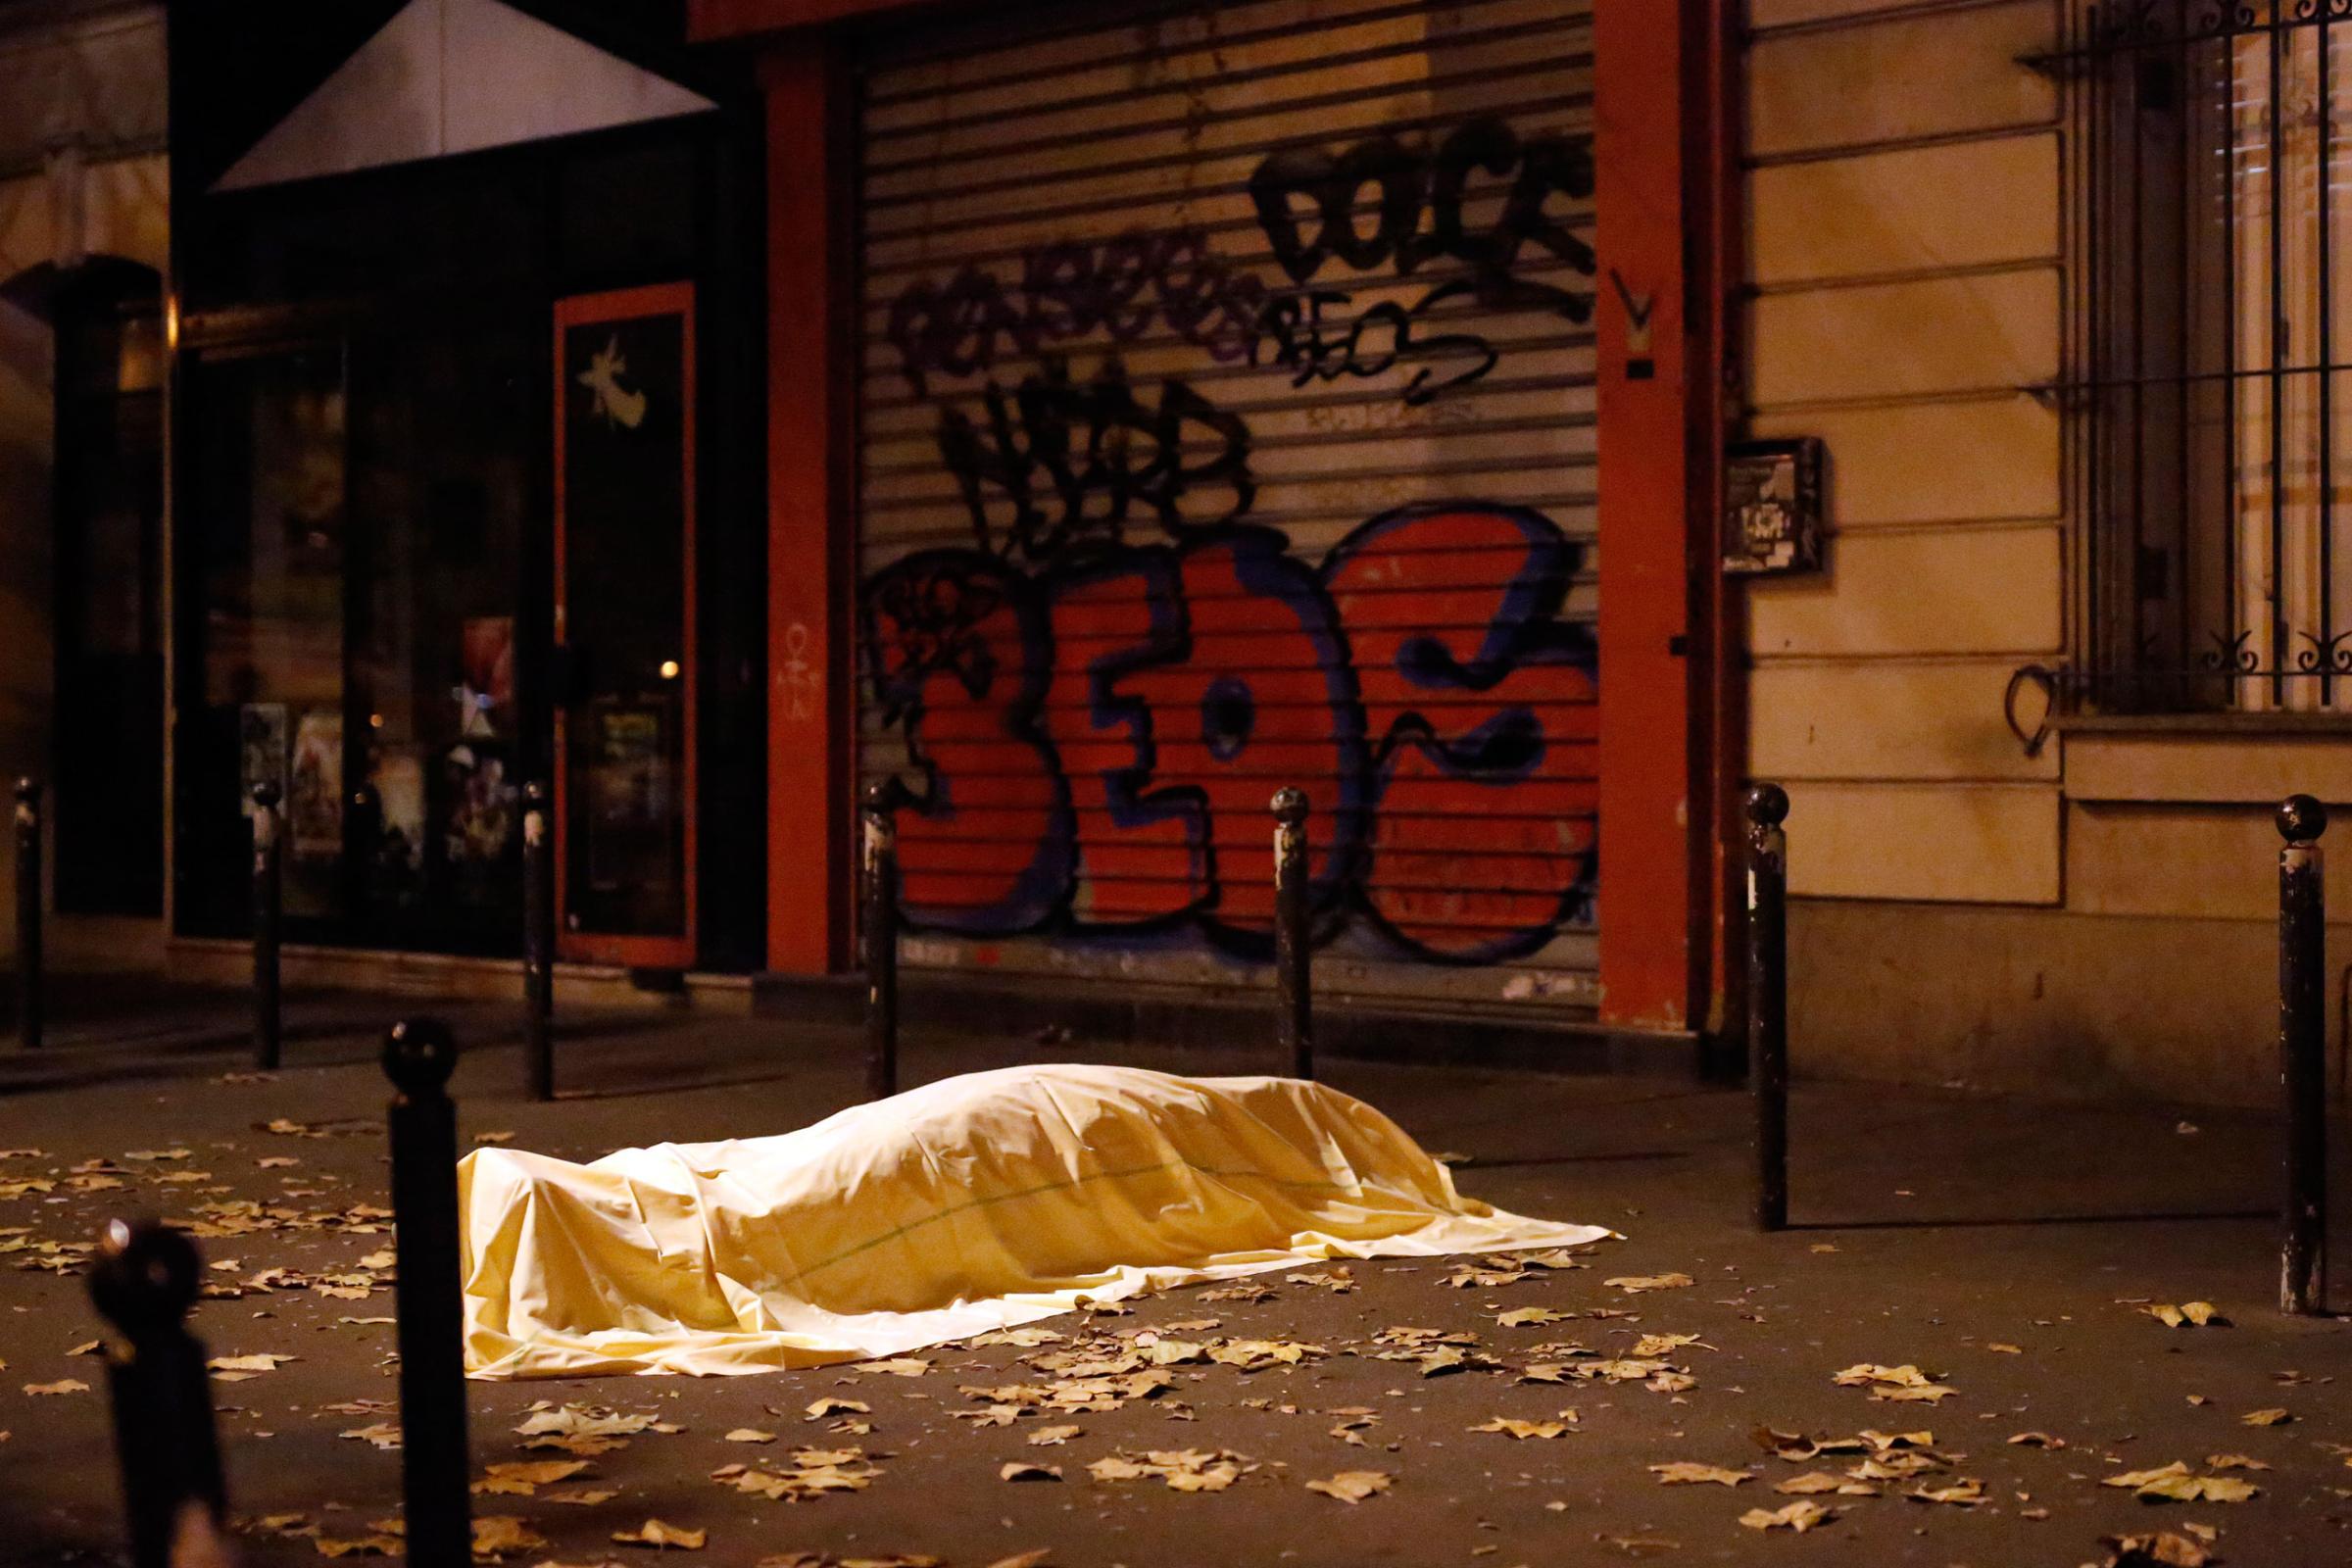 A victim under a blanket lays dead outside the Bataclan theater in Paris, France. Nov. 13, 2015. At least 129 people were killed in a series of shooting and explosions. French President Francois Hollande declared a state of emergency and announced that he was closing the country's borders.